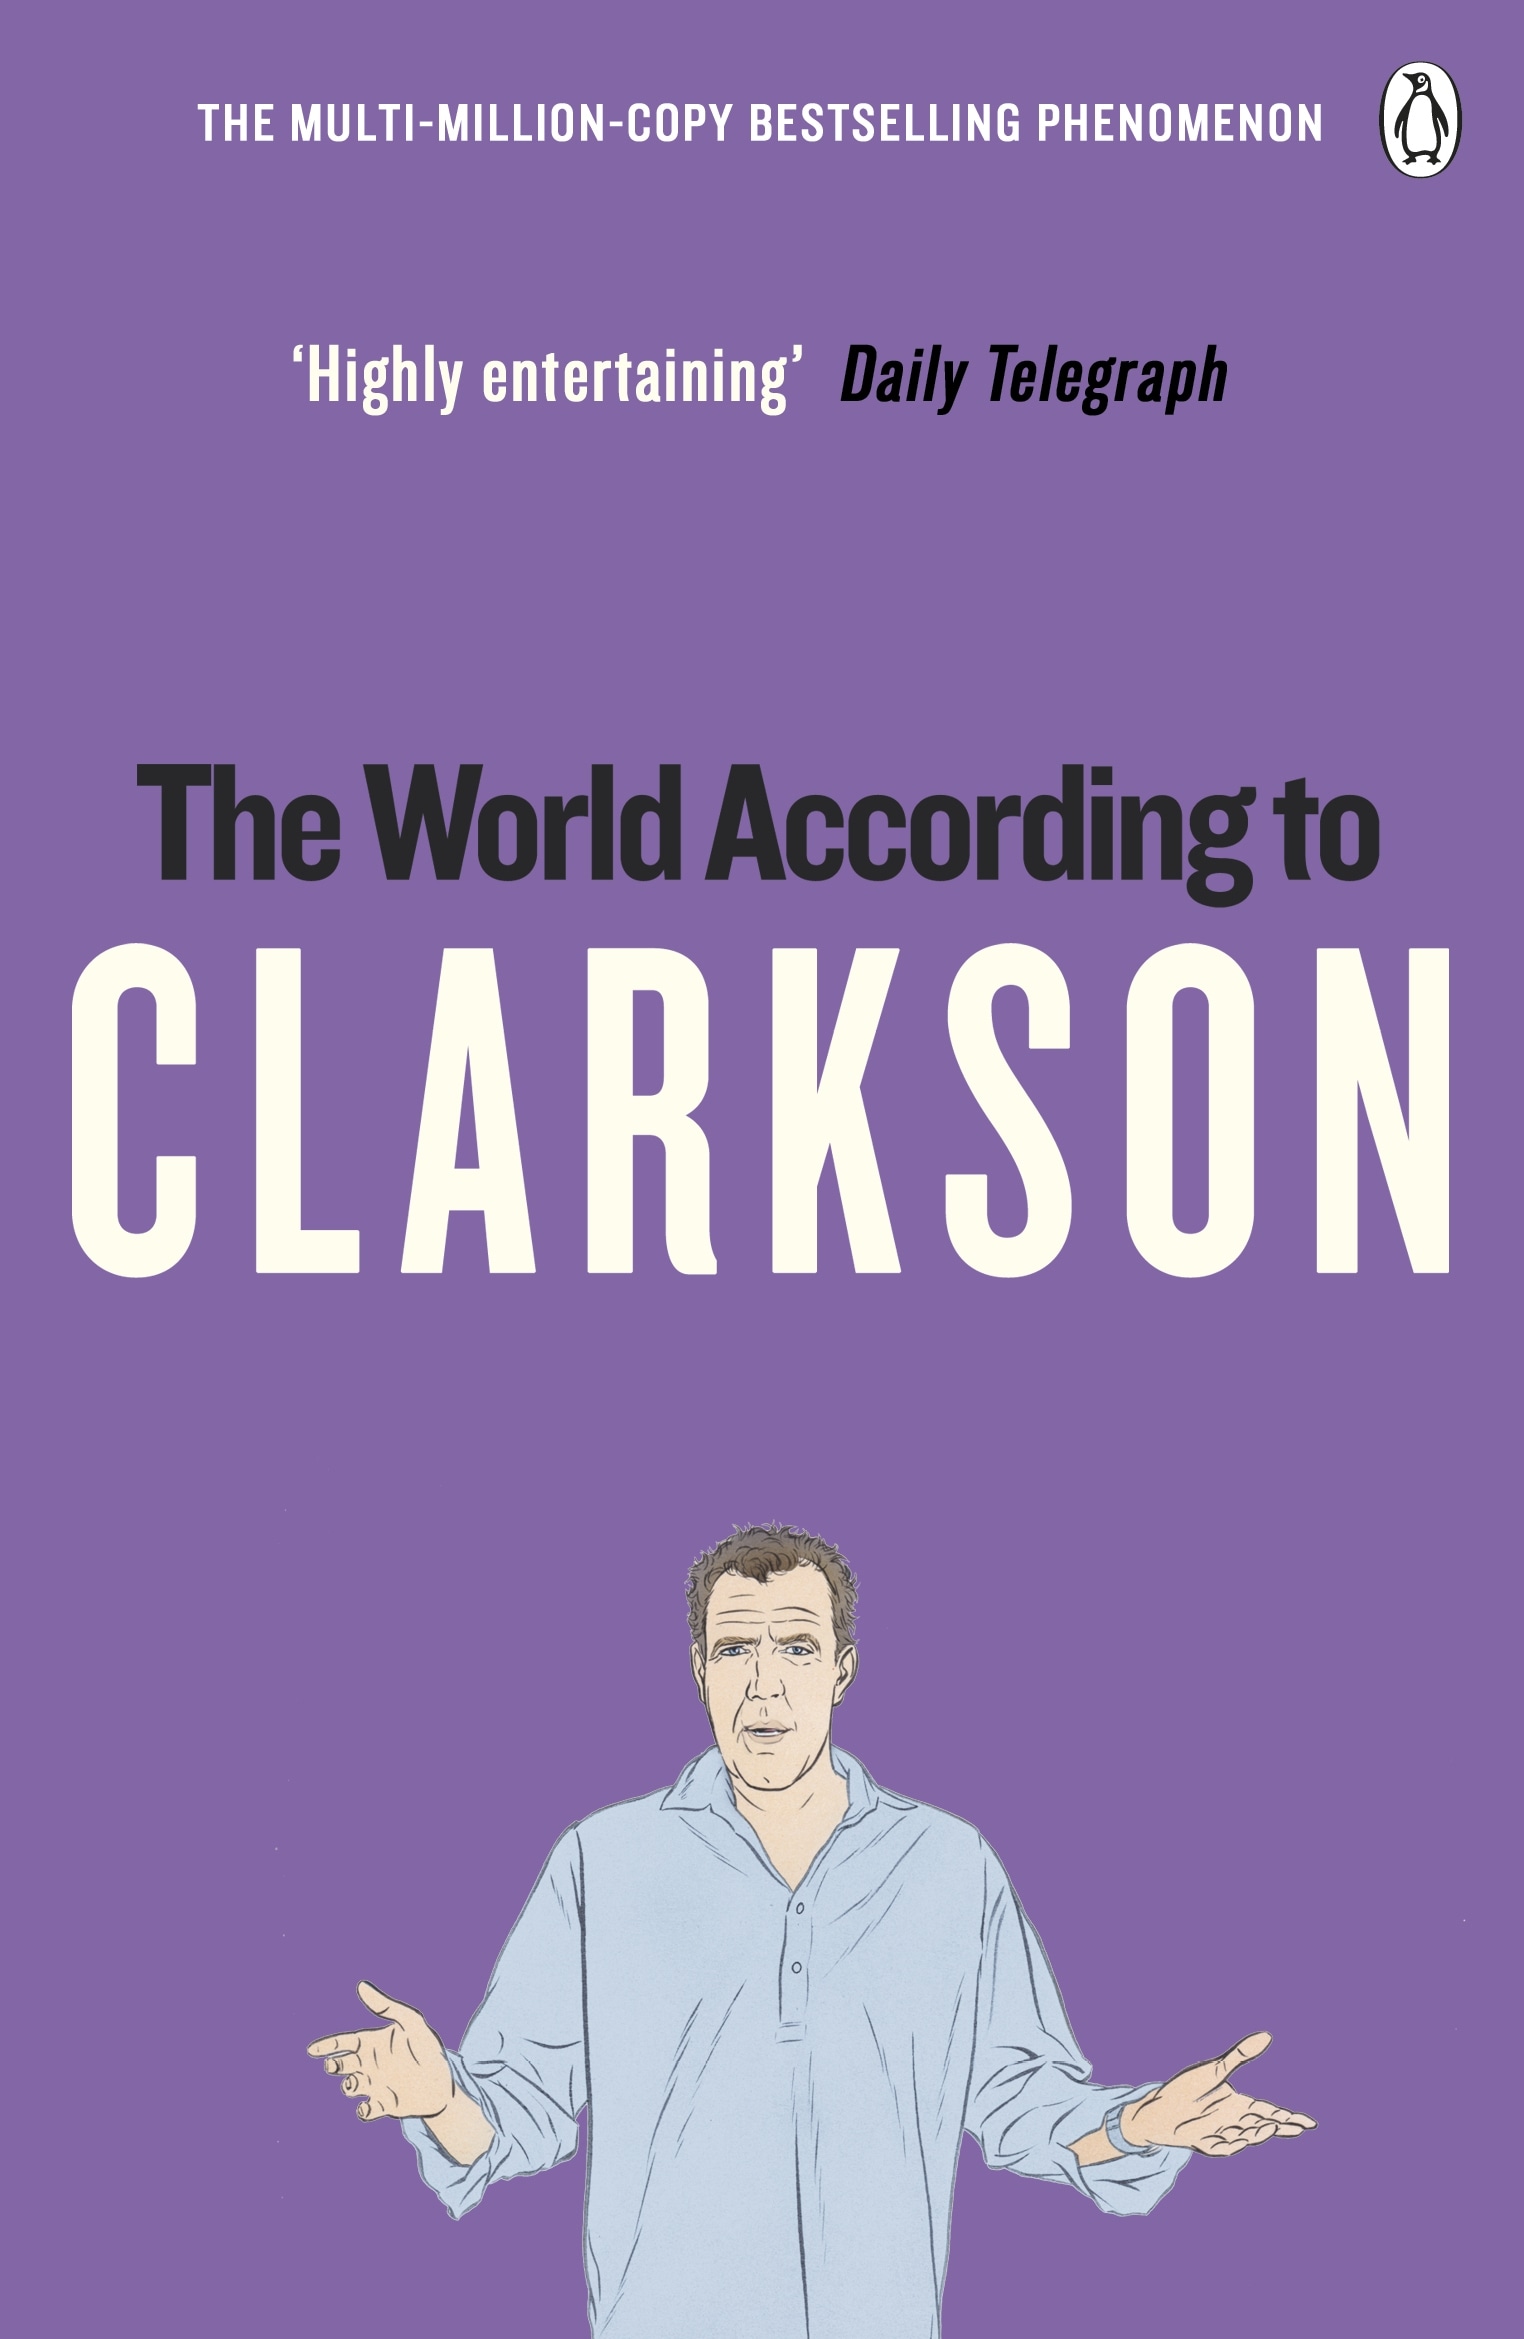 Book “The World According to Clarkson” by Jeremy Clarkson — May 26, 2005